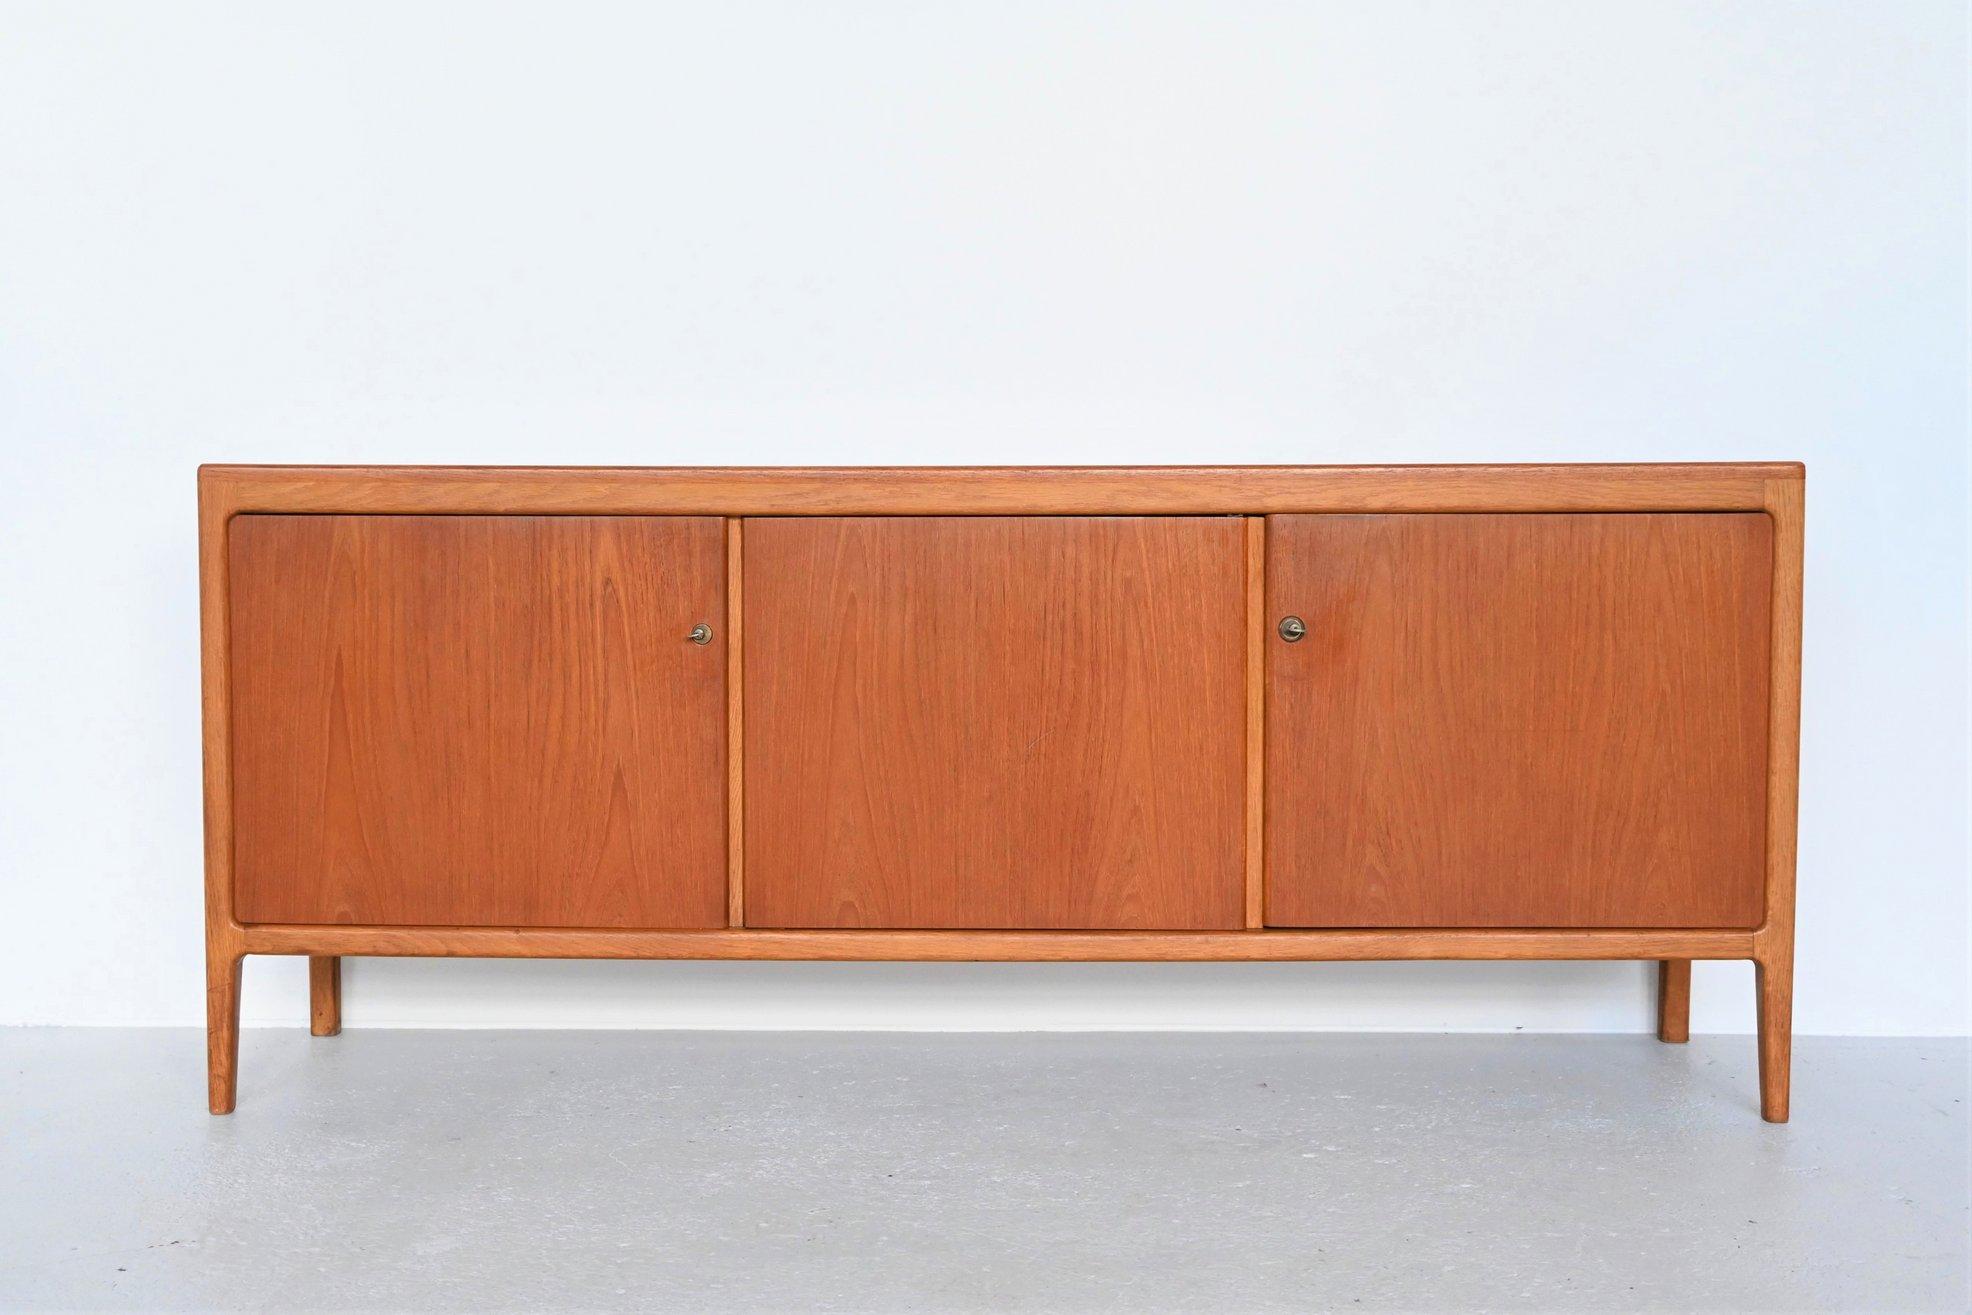 Beautiful shaped sideboard designed by Hartmut Lohmeyer and manufactured by Wilkhahn, Germany, 1959. This sideboard is made of oak and teak wood which creates a very nice and playful contrast. It has plenty of storage space on the inside. Behind the